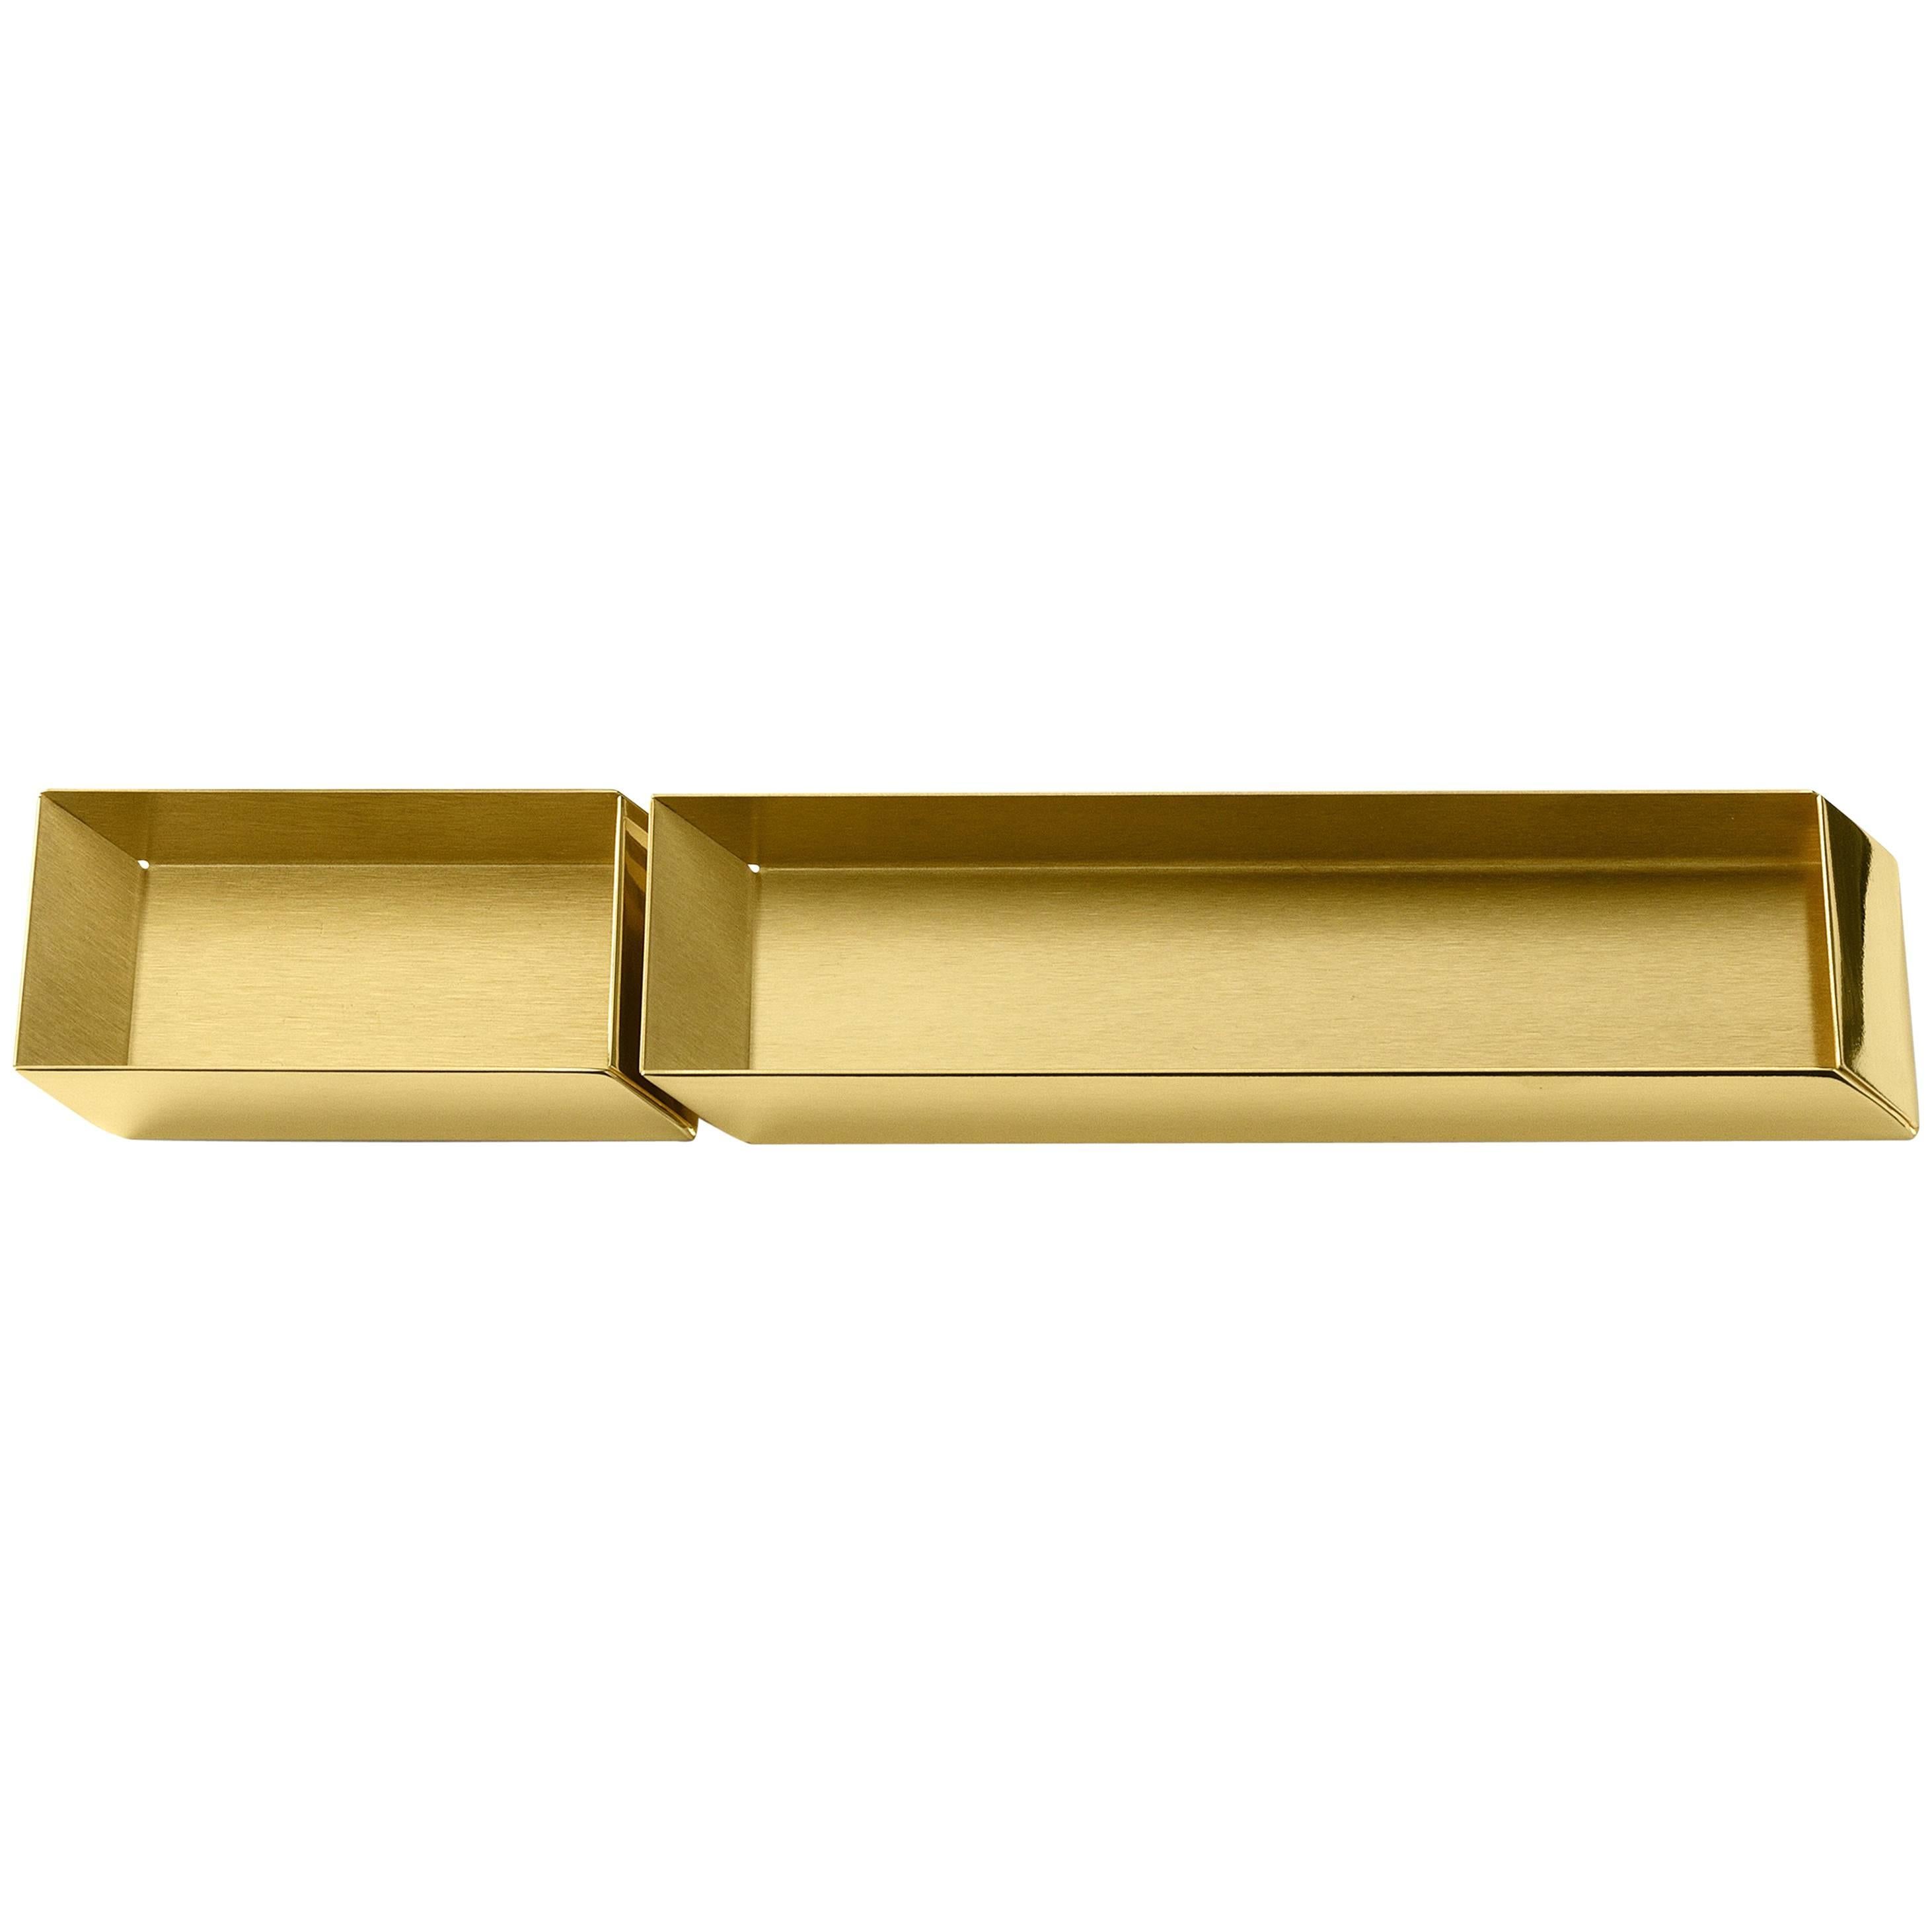 Ghidini 1961 Axonometry Pen and Cards Desk Trays Set in Polished Brass